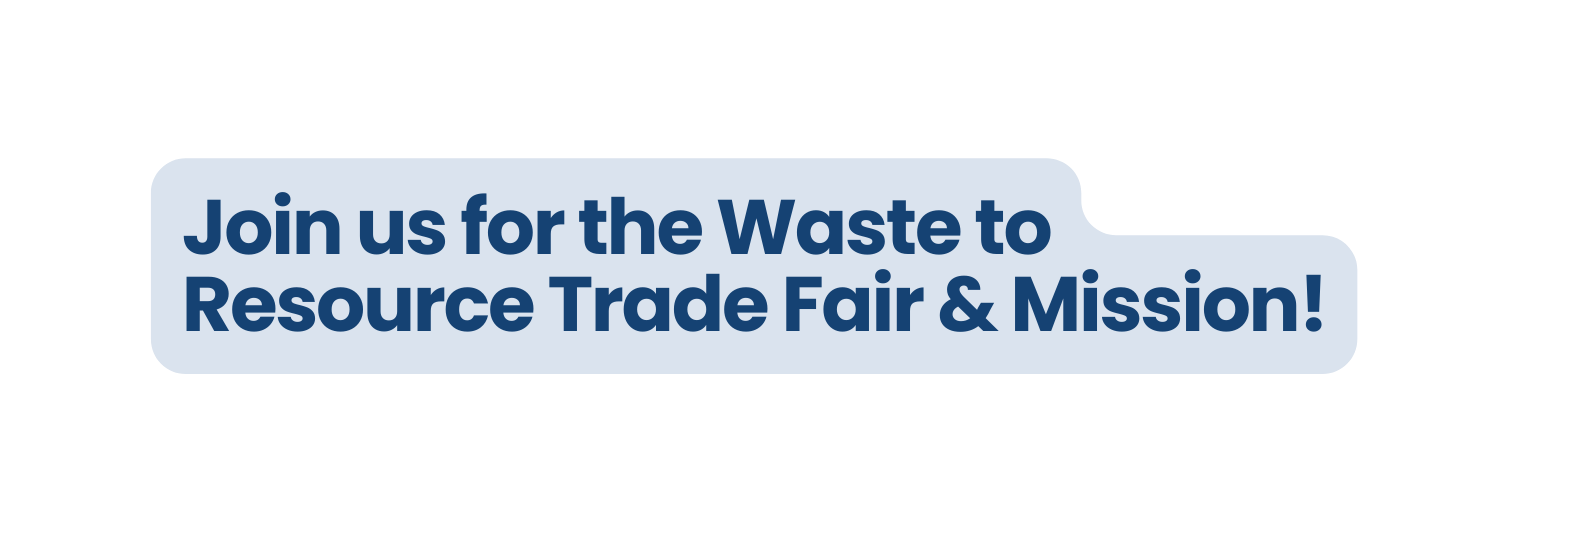 Join us for the Waste to Resource Trade Fair Mission